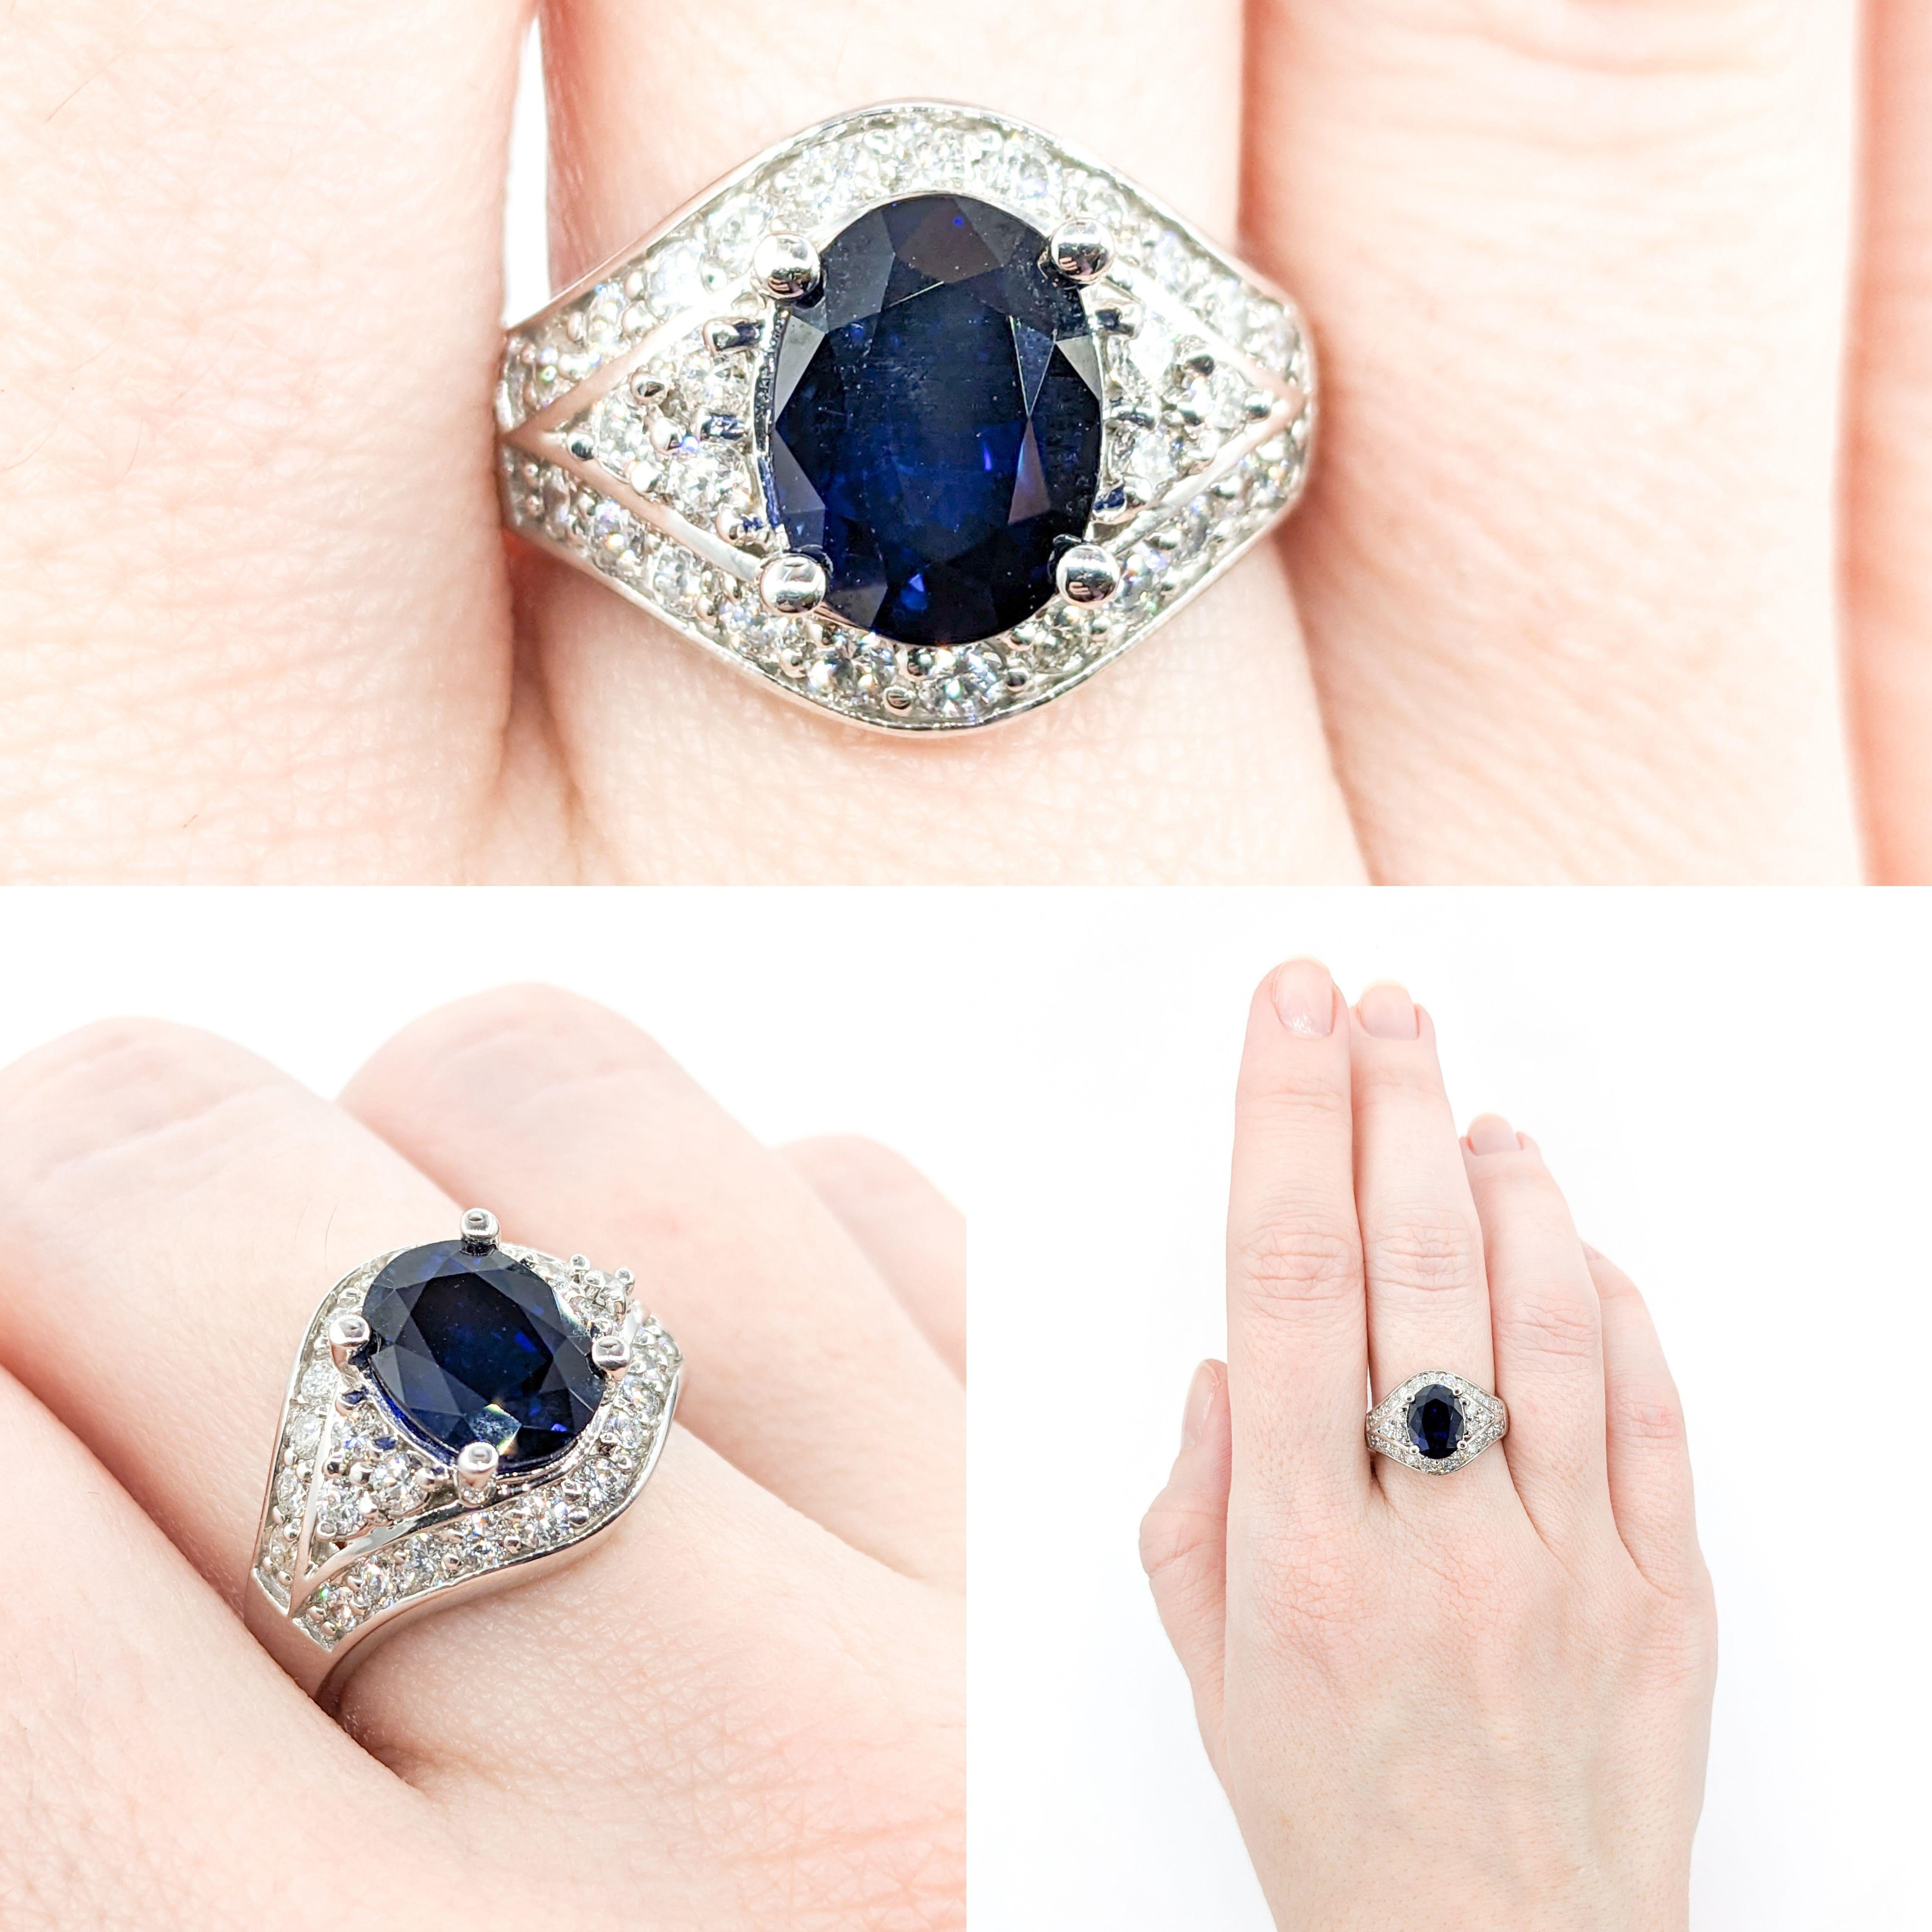 Gorgeous 3.24ct Sapphire & .87ctw Diamond Ring 

This Beautiful Ring is crafted in 14k White Gold and features .87ctw of Round Diamonds. The Sparkly Diamonds are SI1-SI2 clarity and G color. The Ring also features a 3.24ct heated Sapphire. This